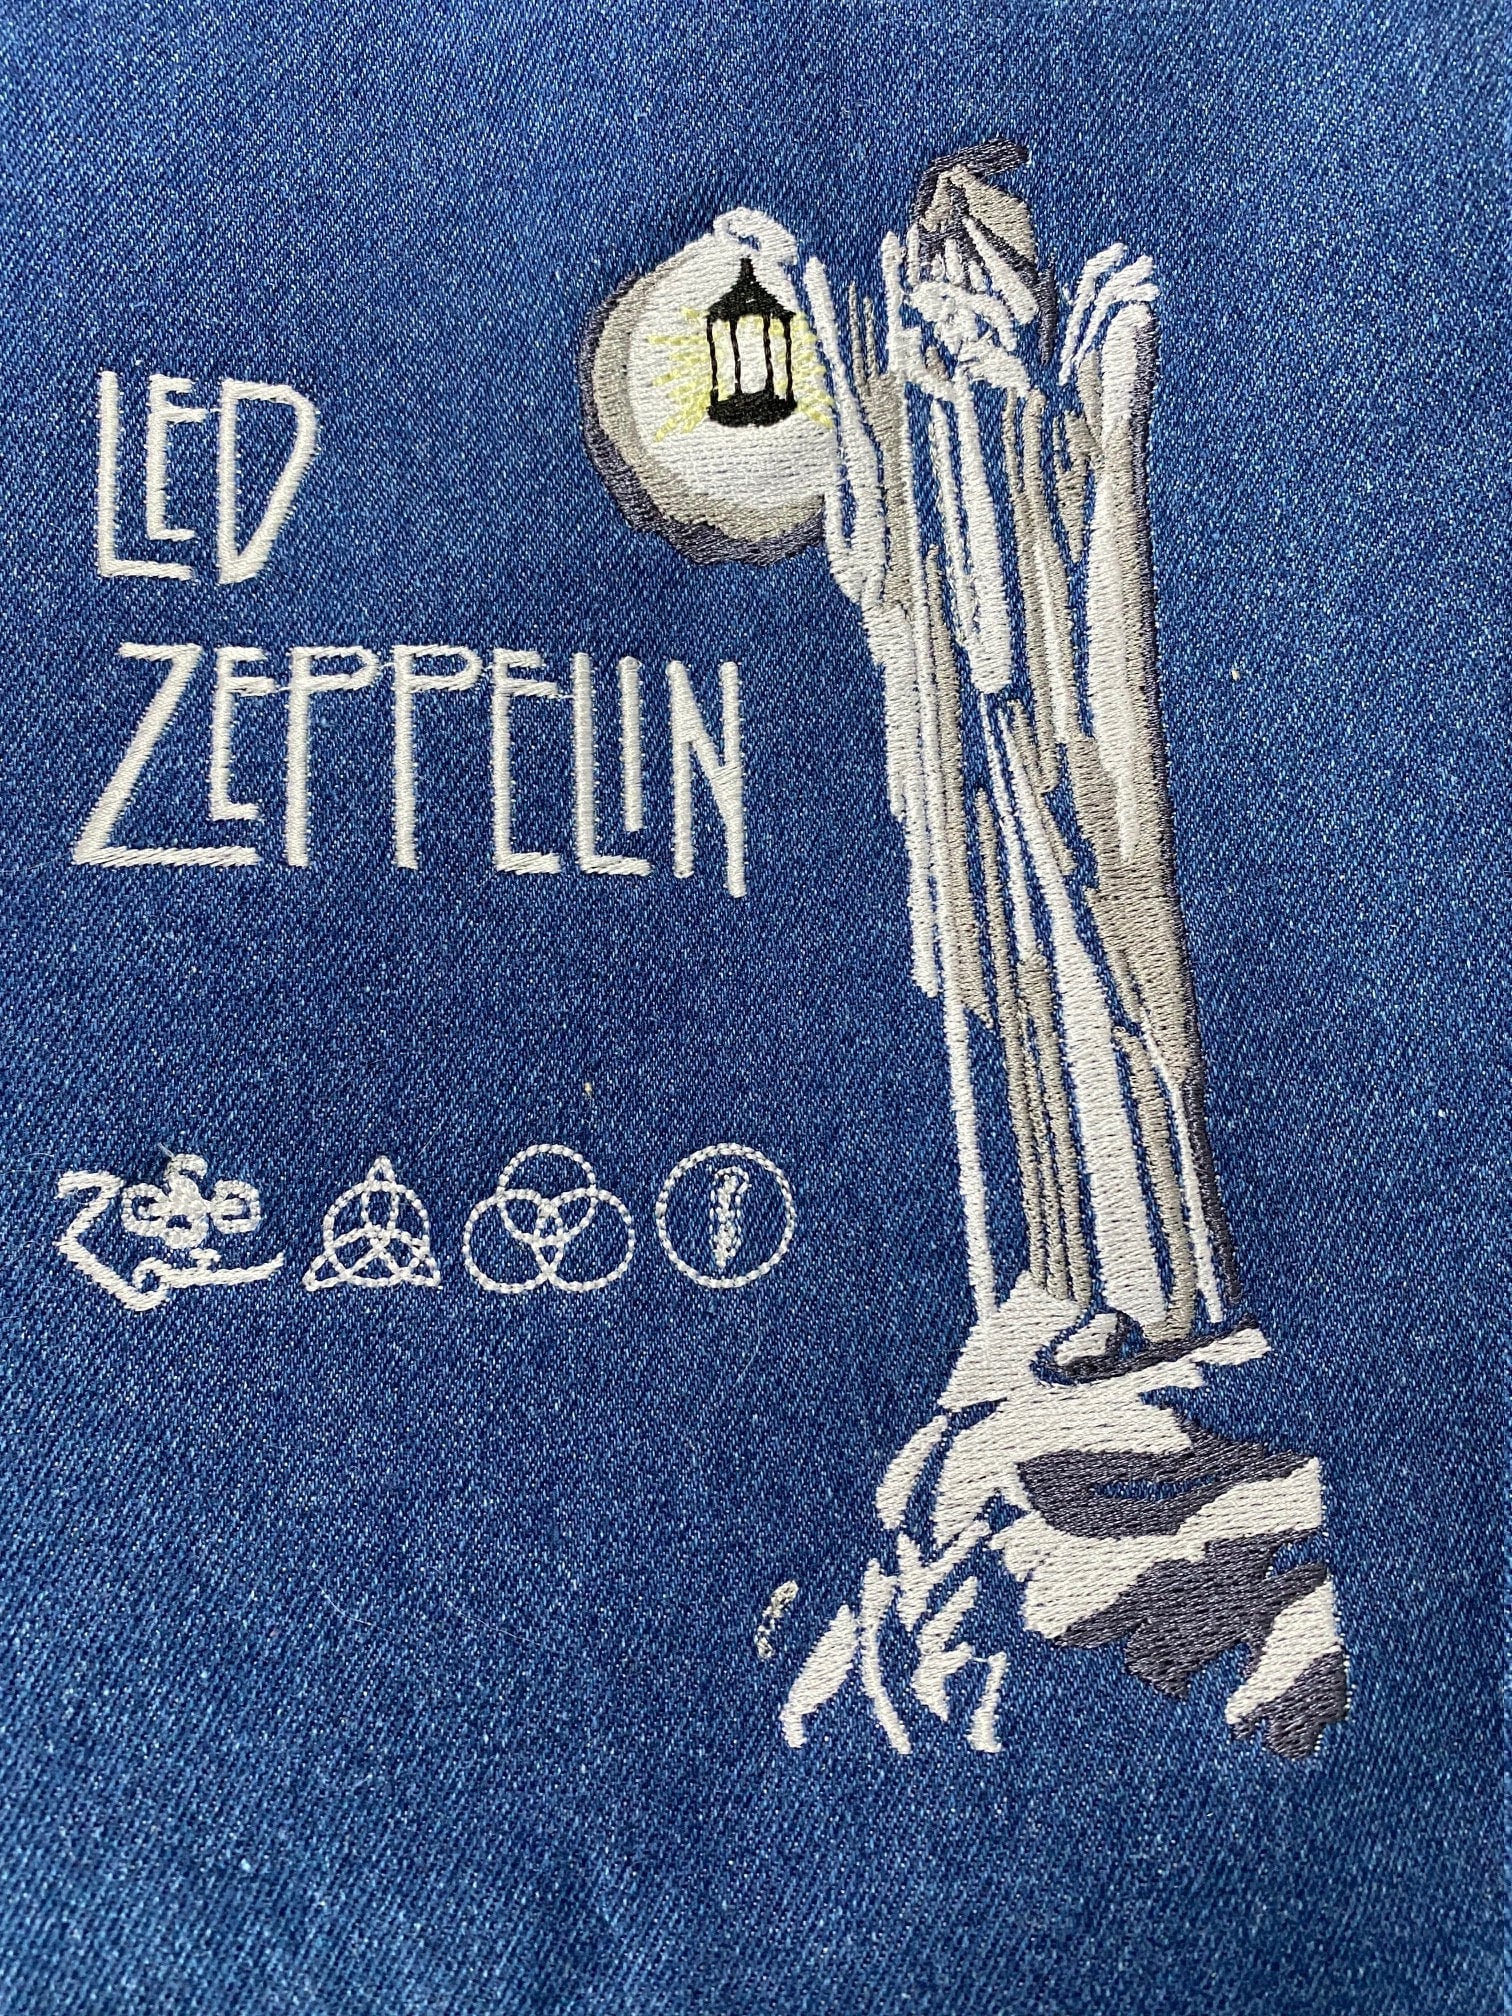 Patch ecusson thermocollant led zeppelin rock band english